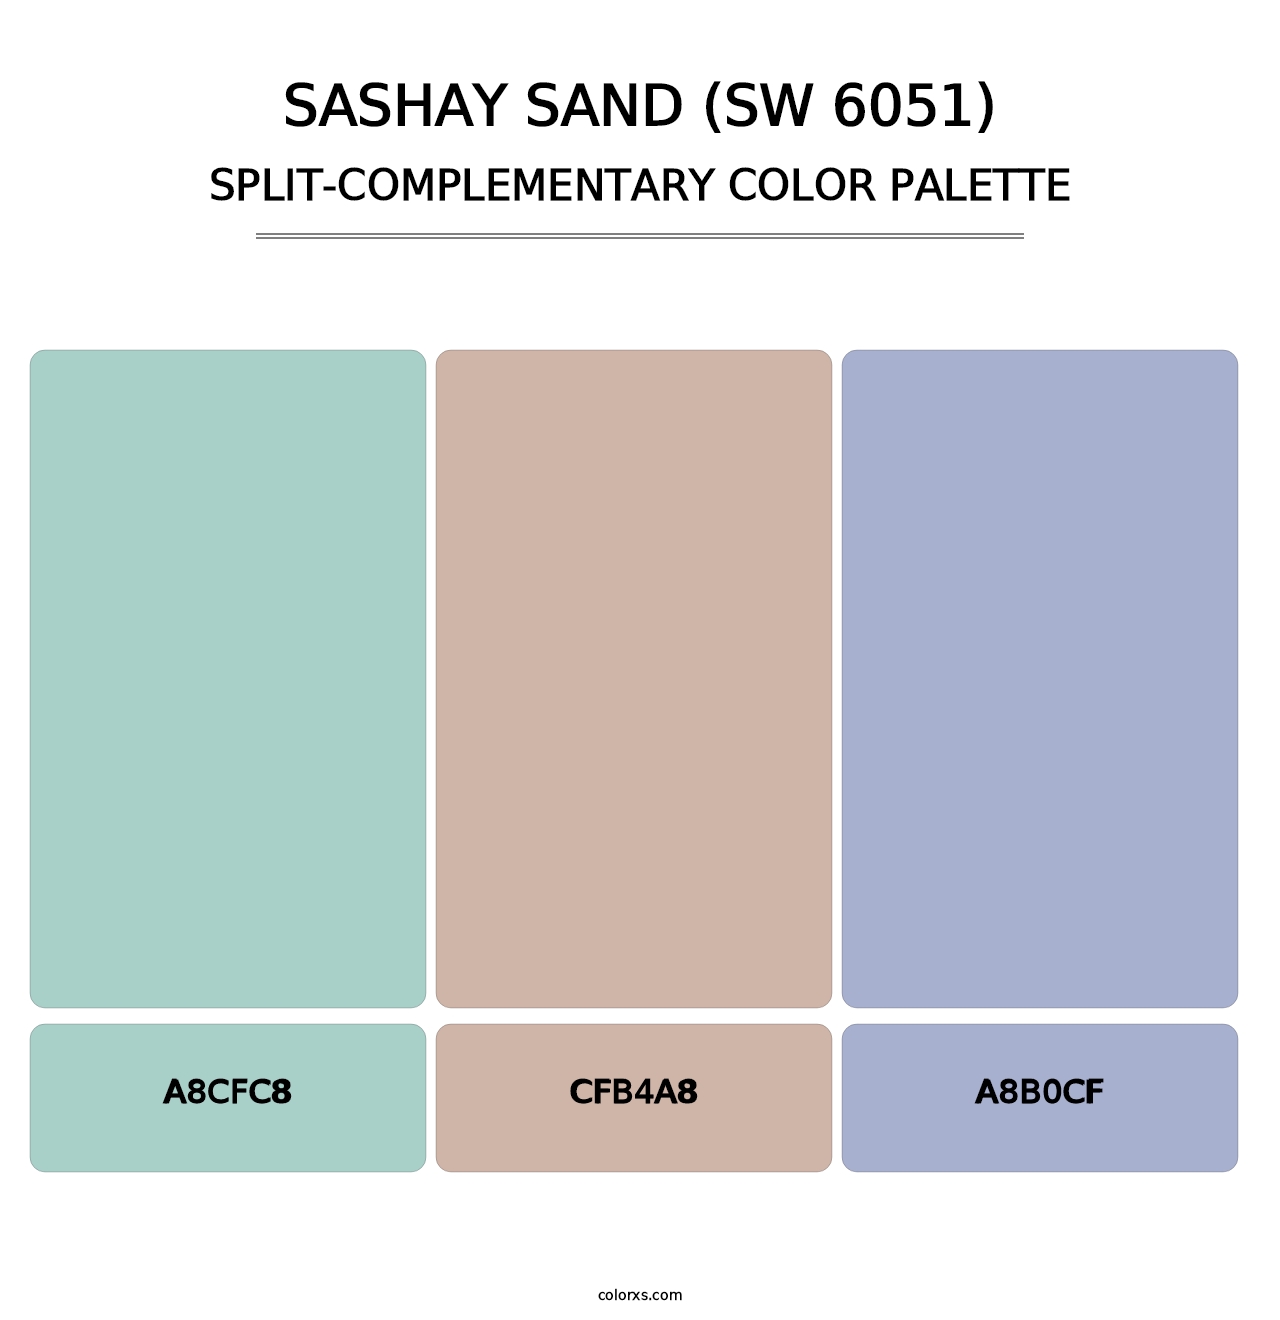 Sashay Sand (SW 6051) - Split-Complementary Color Palette